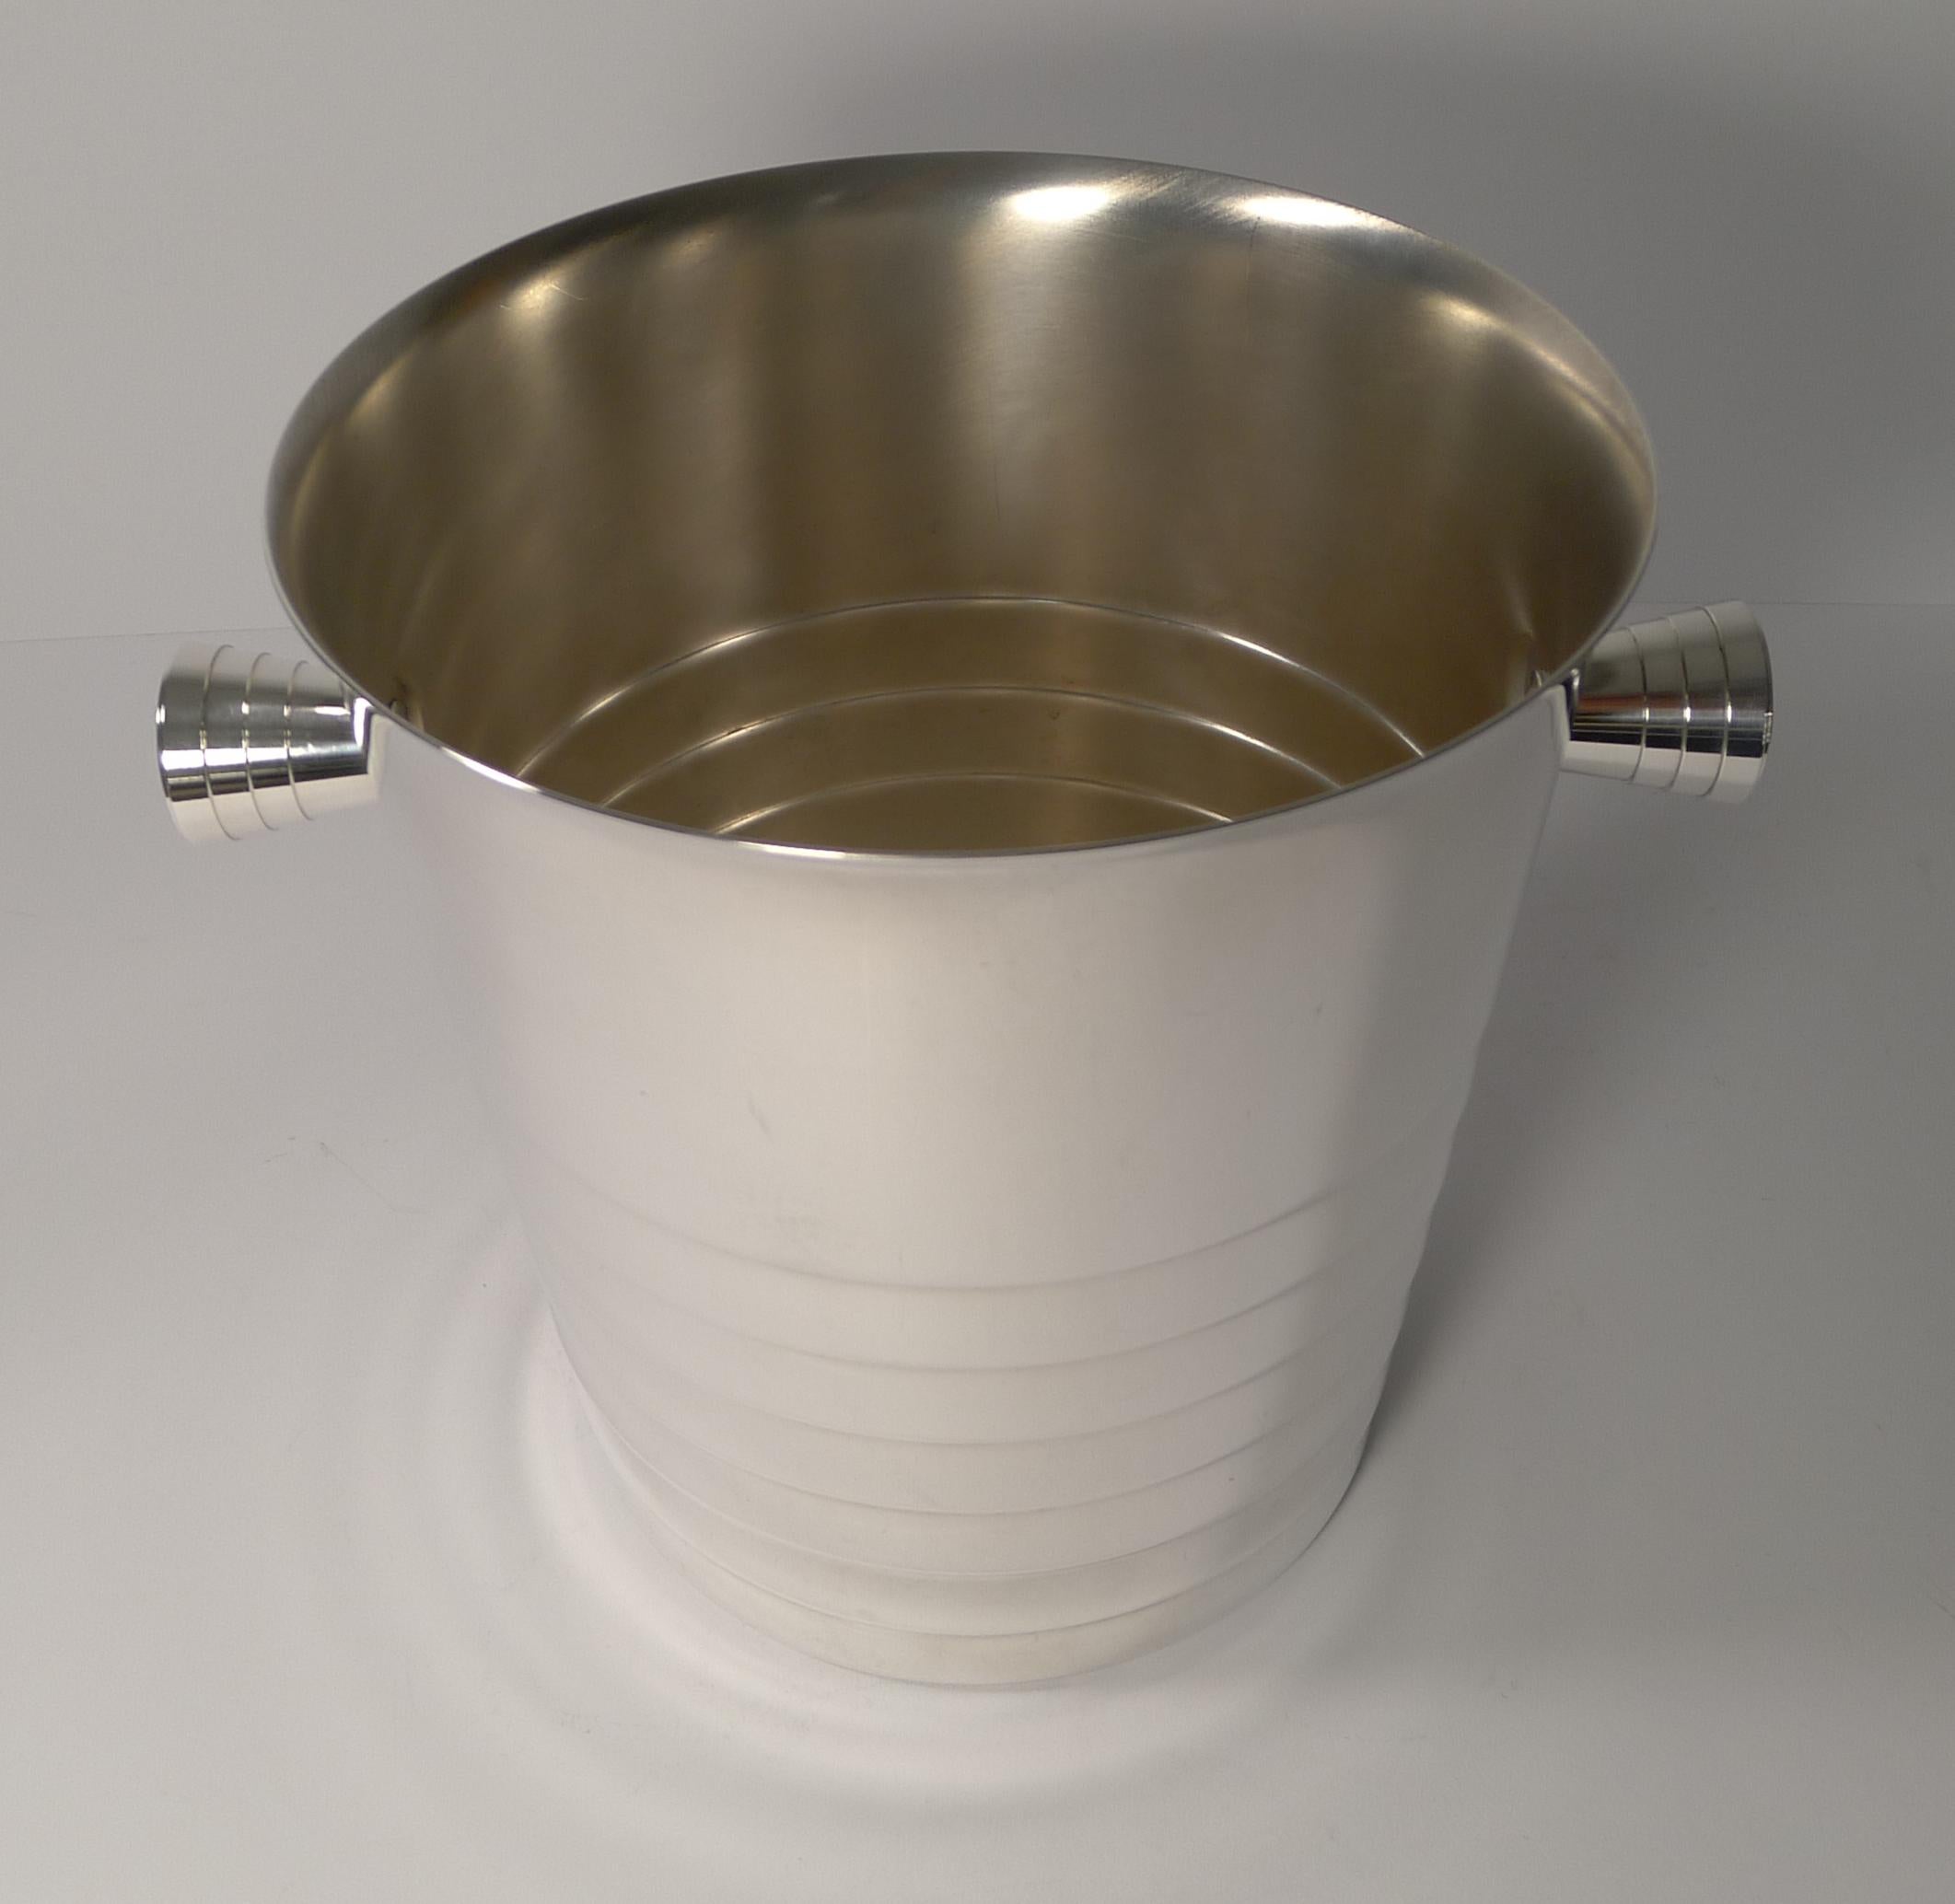 Late 20th Century Folio Champagne Bucket or Wine Cooler by Maison Christofle, Paris